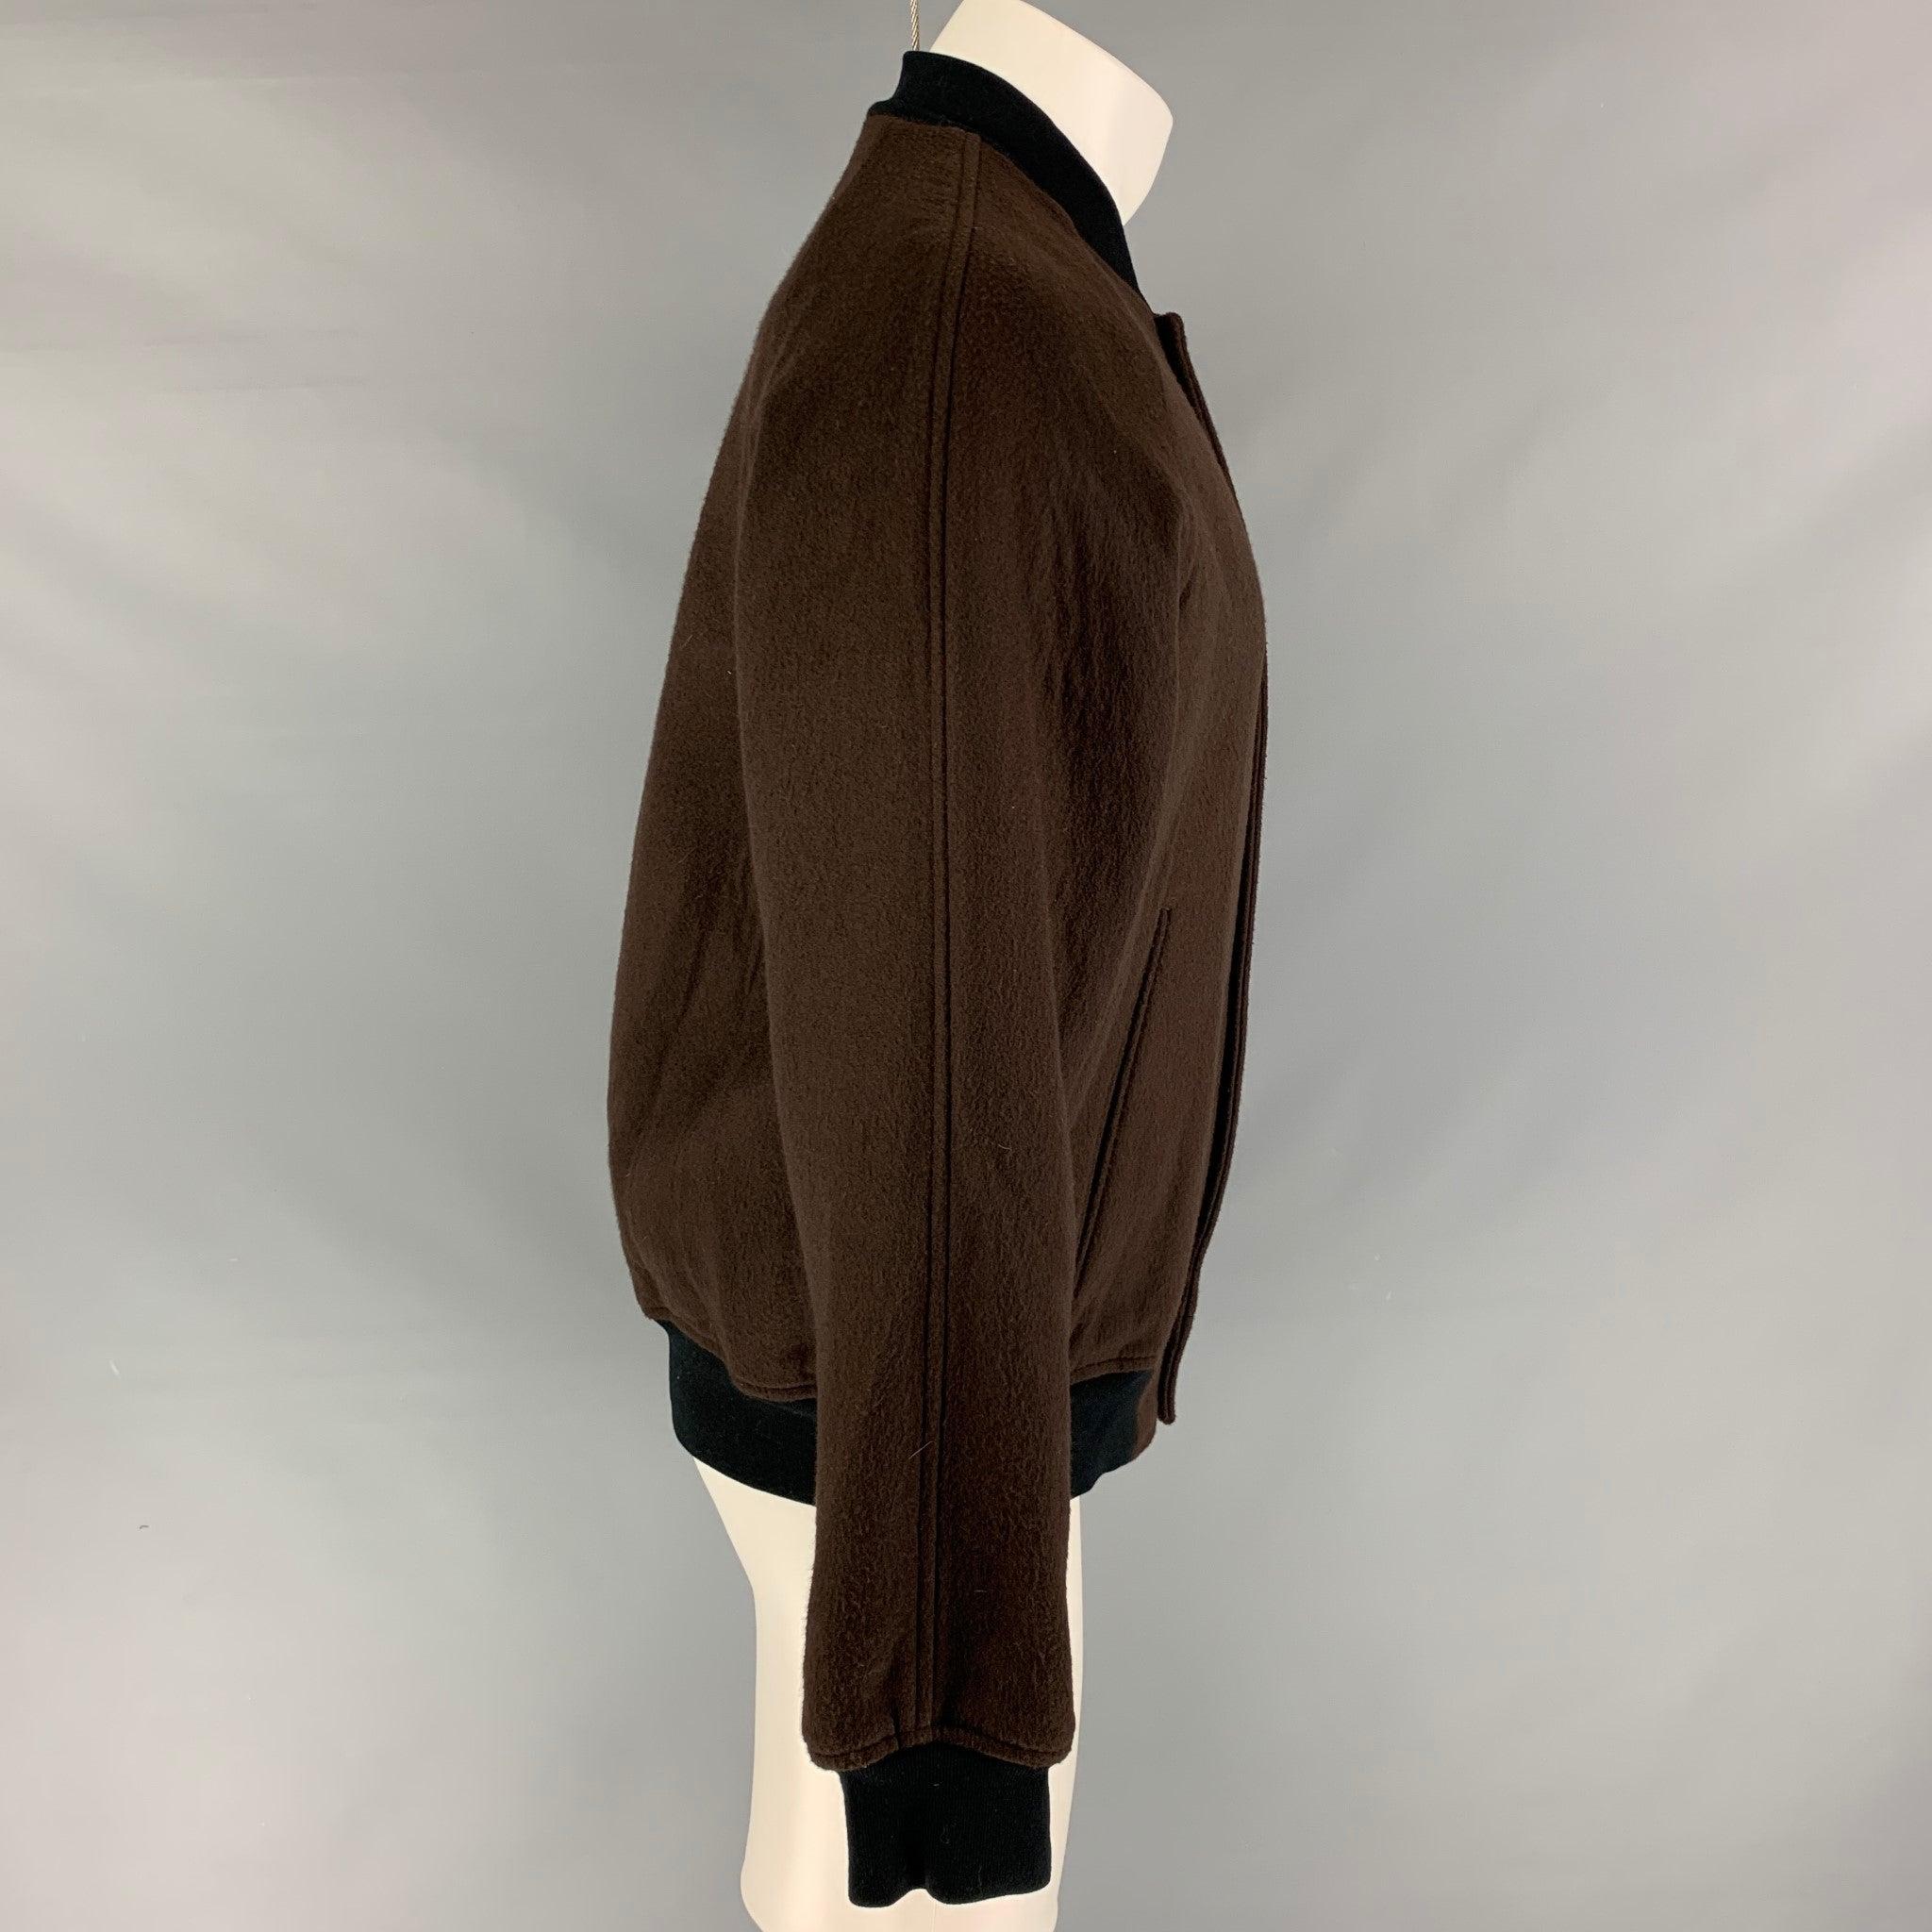 MARC JACOBS jacket comes in a brown wool blend featuring a bomber style, loose fit, ribbed hem, and a snap button closure. Made in Italy.
Very Good
Pre-Owned Condition. 

Marked:   48 

Measurements: 
 
Shoulder: 17 inches  Chest: 44 inches  Sleeve: